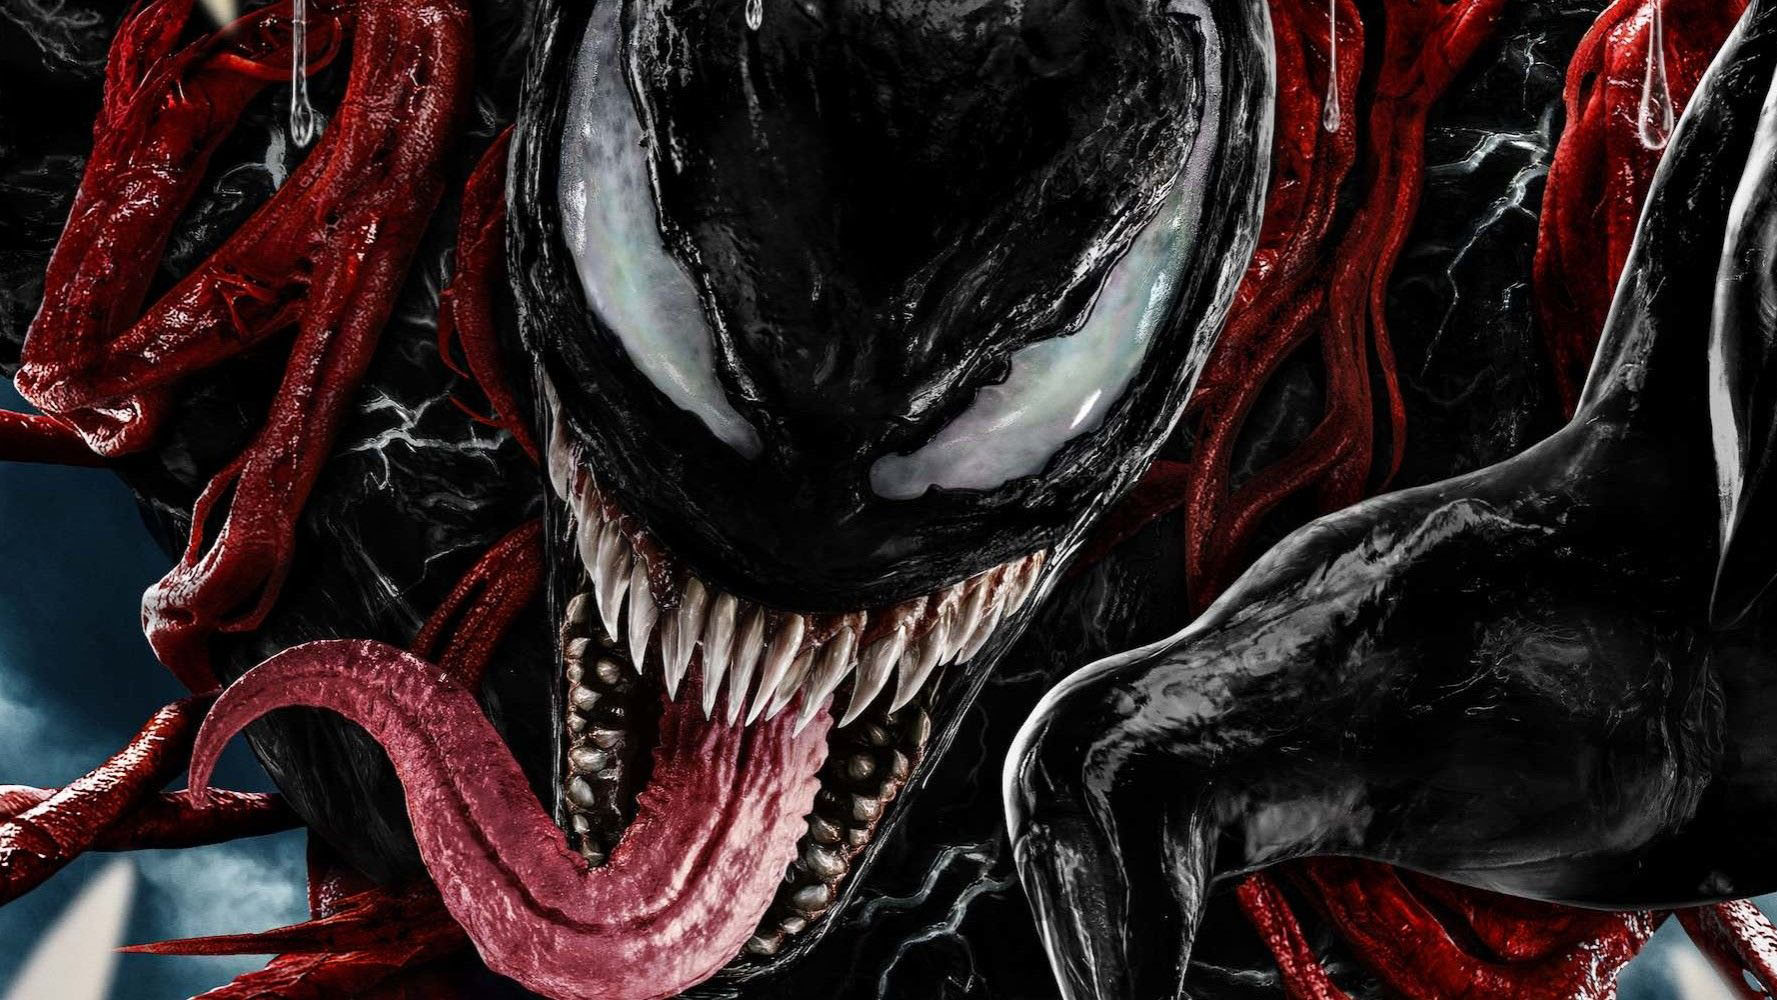 Venom: Let There Be Carnage is an upcoming American superhero film based on the Marvel Comics character Venom, produced by Columbia Pictures in associ...